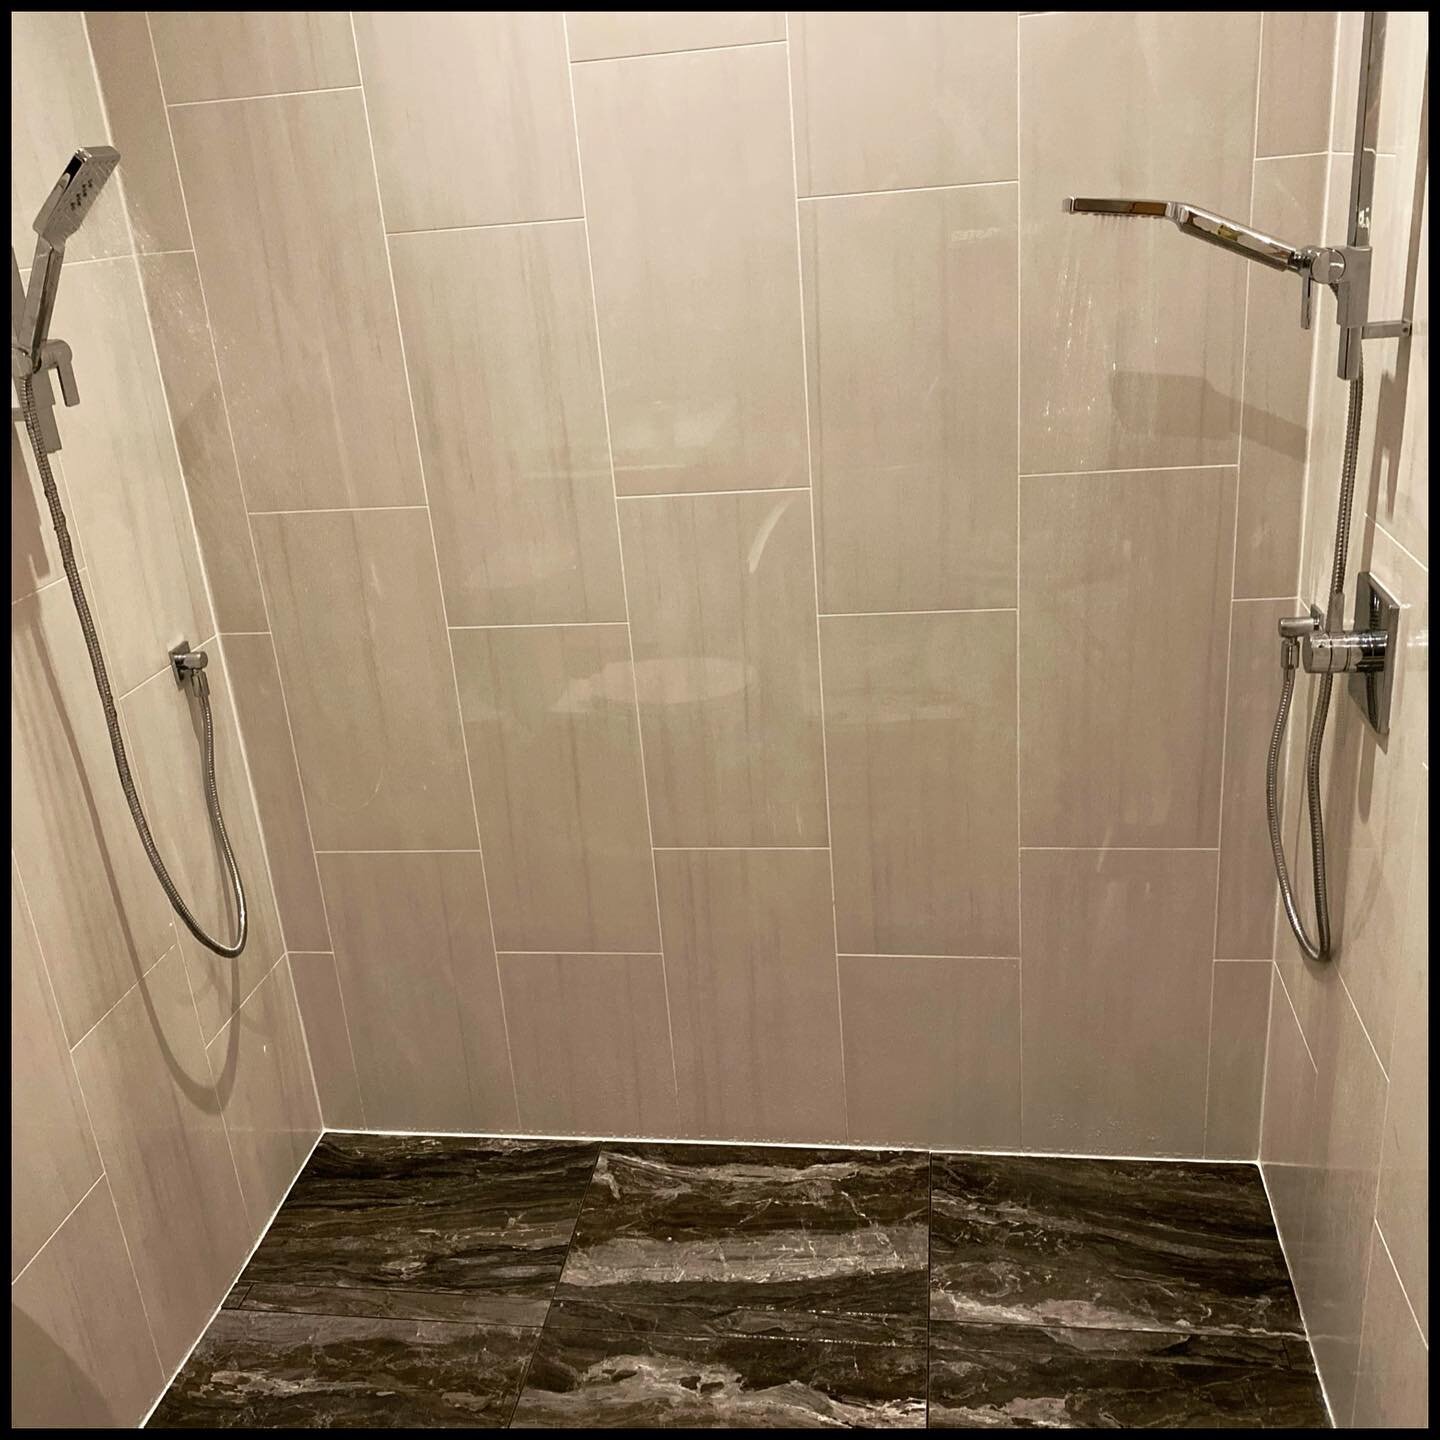 Schluter zero clearance shower, with tile able linear drain ✨ 

That&rsquo;s the good stuff right there 🏆 

#muskoka #airbnb #12x24 
#tileshower #bathroominspirations #schlutersystems  #zeroclearance  #drainer  #baeumlerapproved #beigeaesthetic #bla